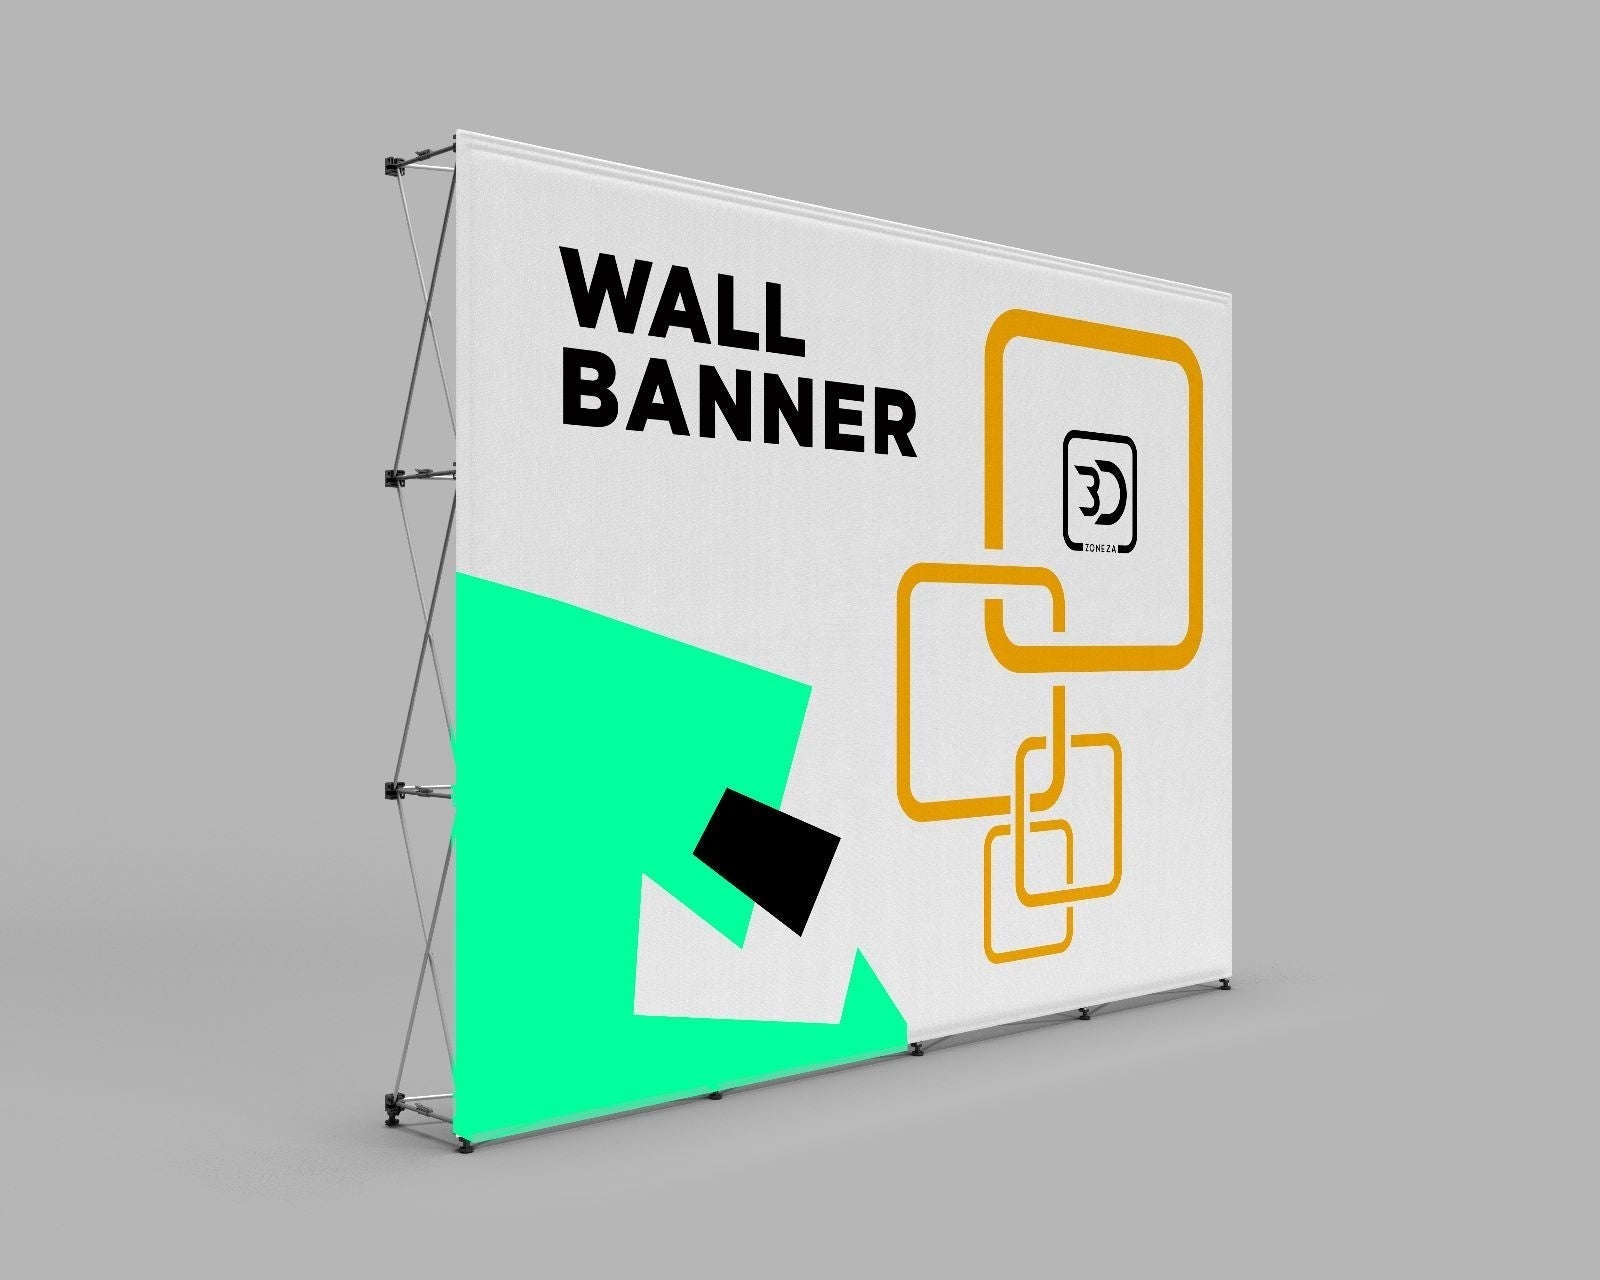 4X3 Pop-Up Wall Banner Display (118.5H X 89.5W in.)